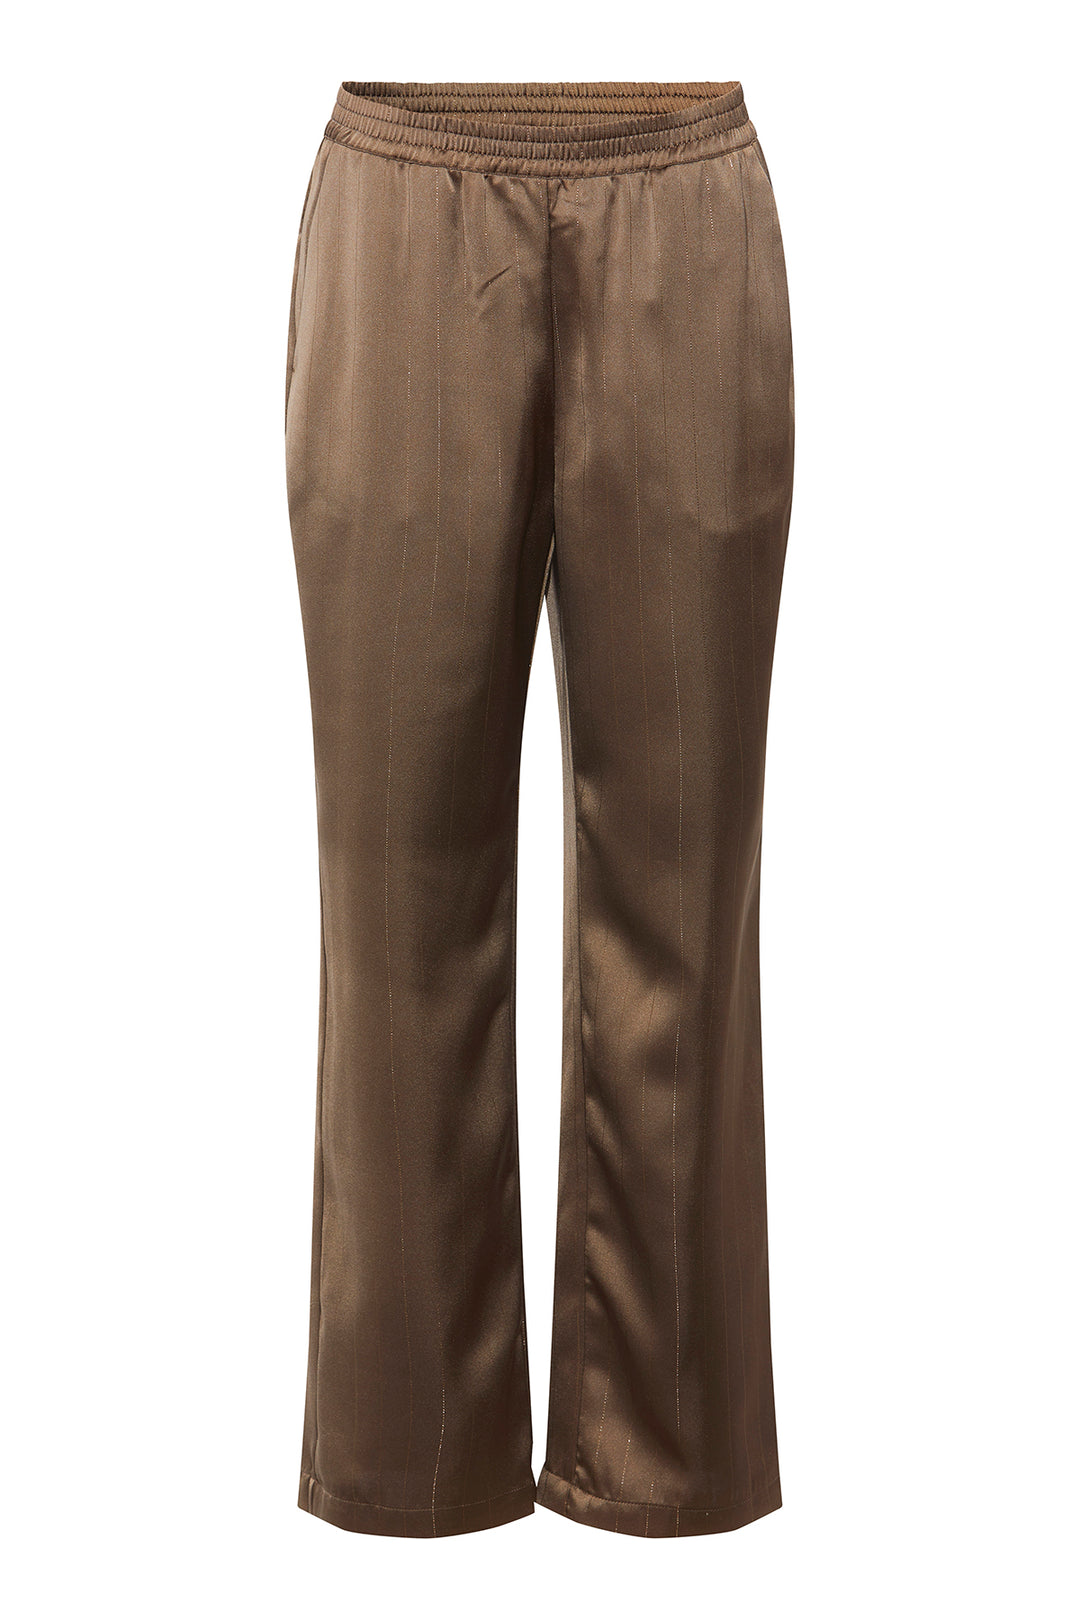 PBO Amalie pants TROUSERS 764 Gold earth